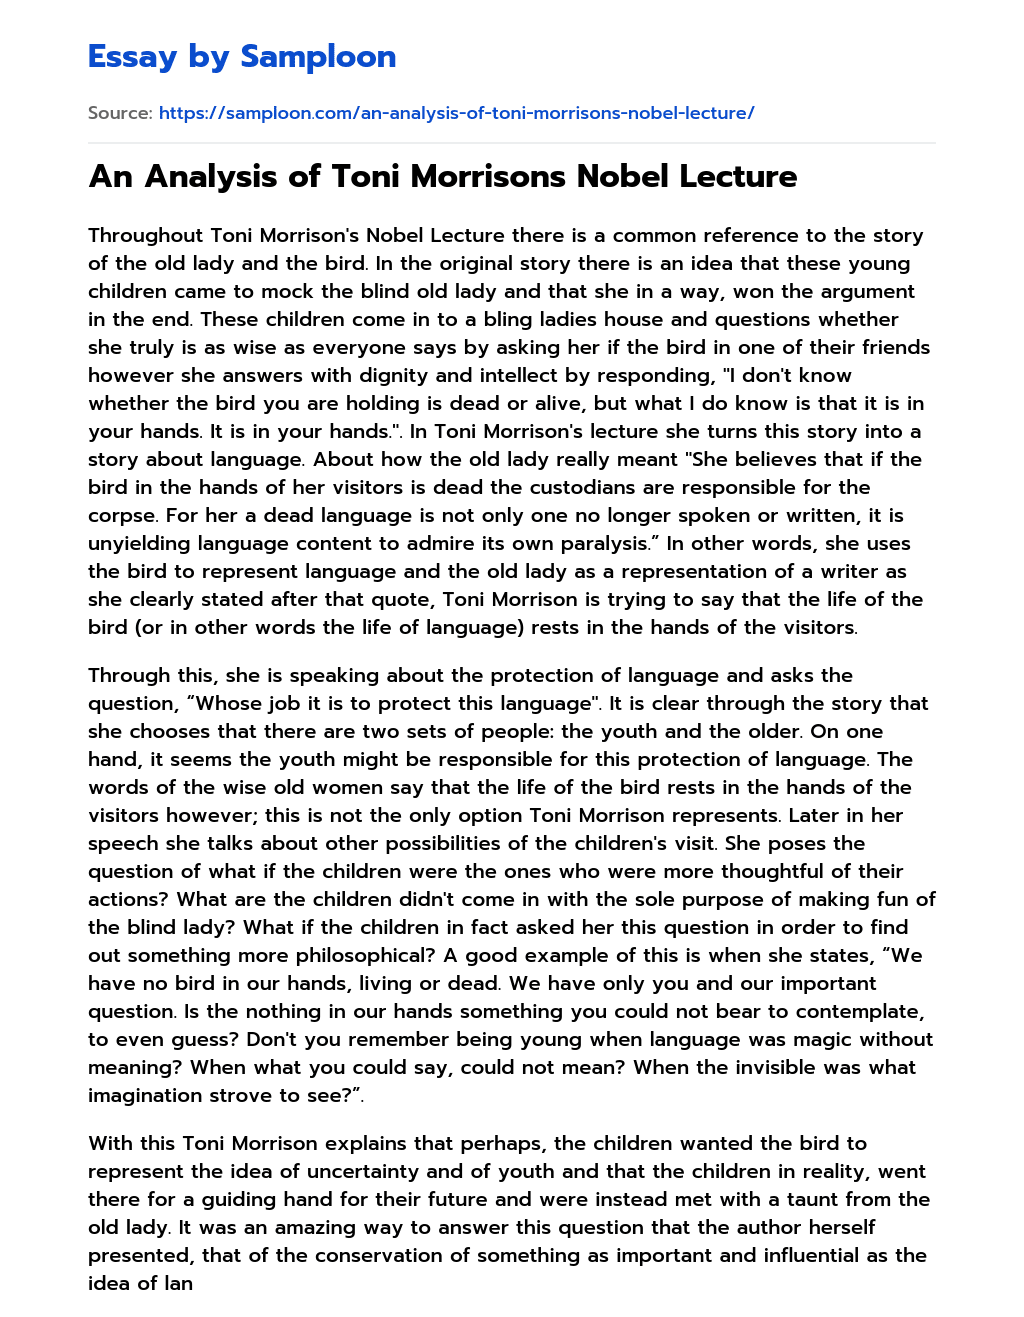 An Analysis of Toni Morrisons Nobel Lecture essay